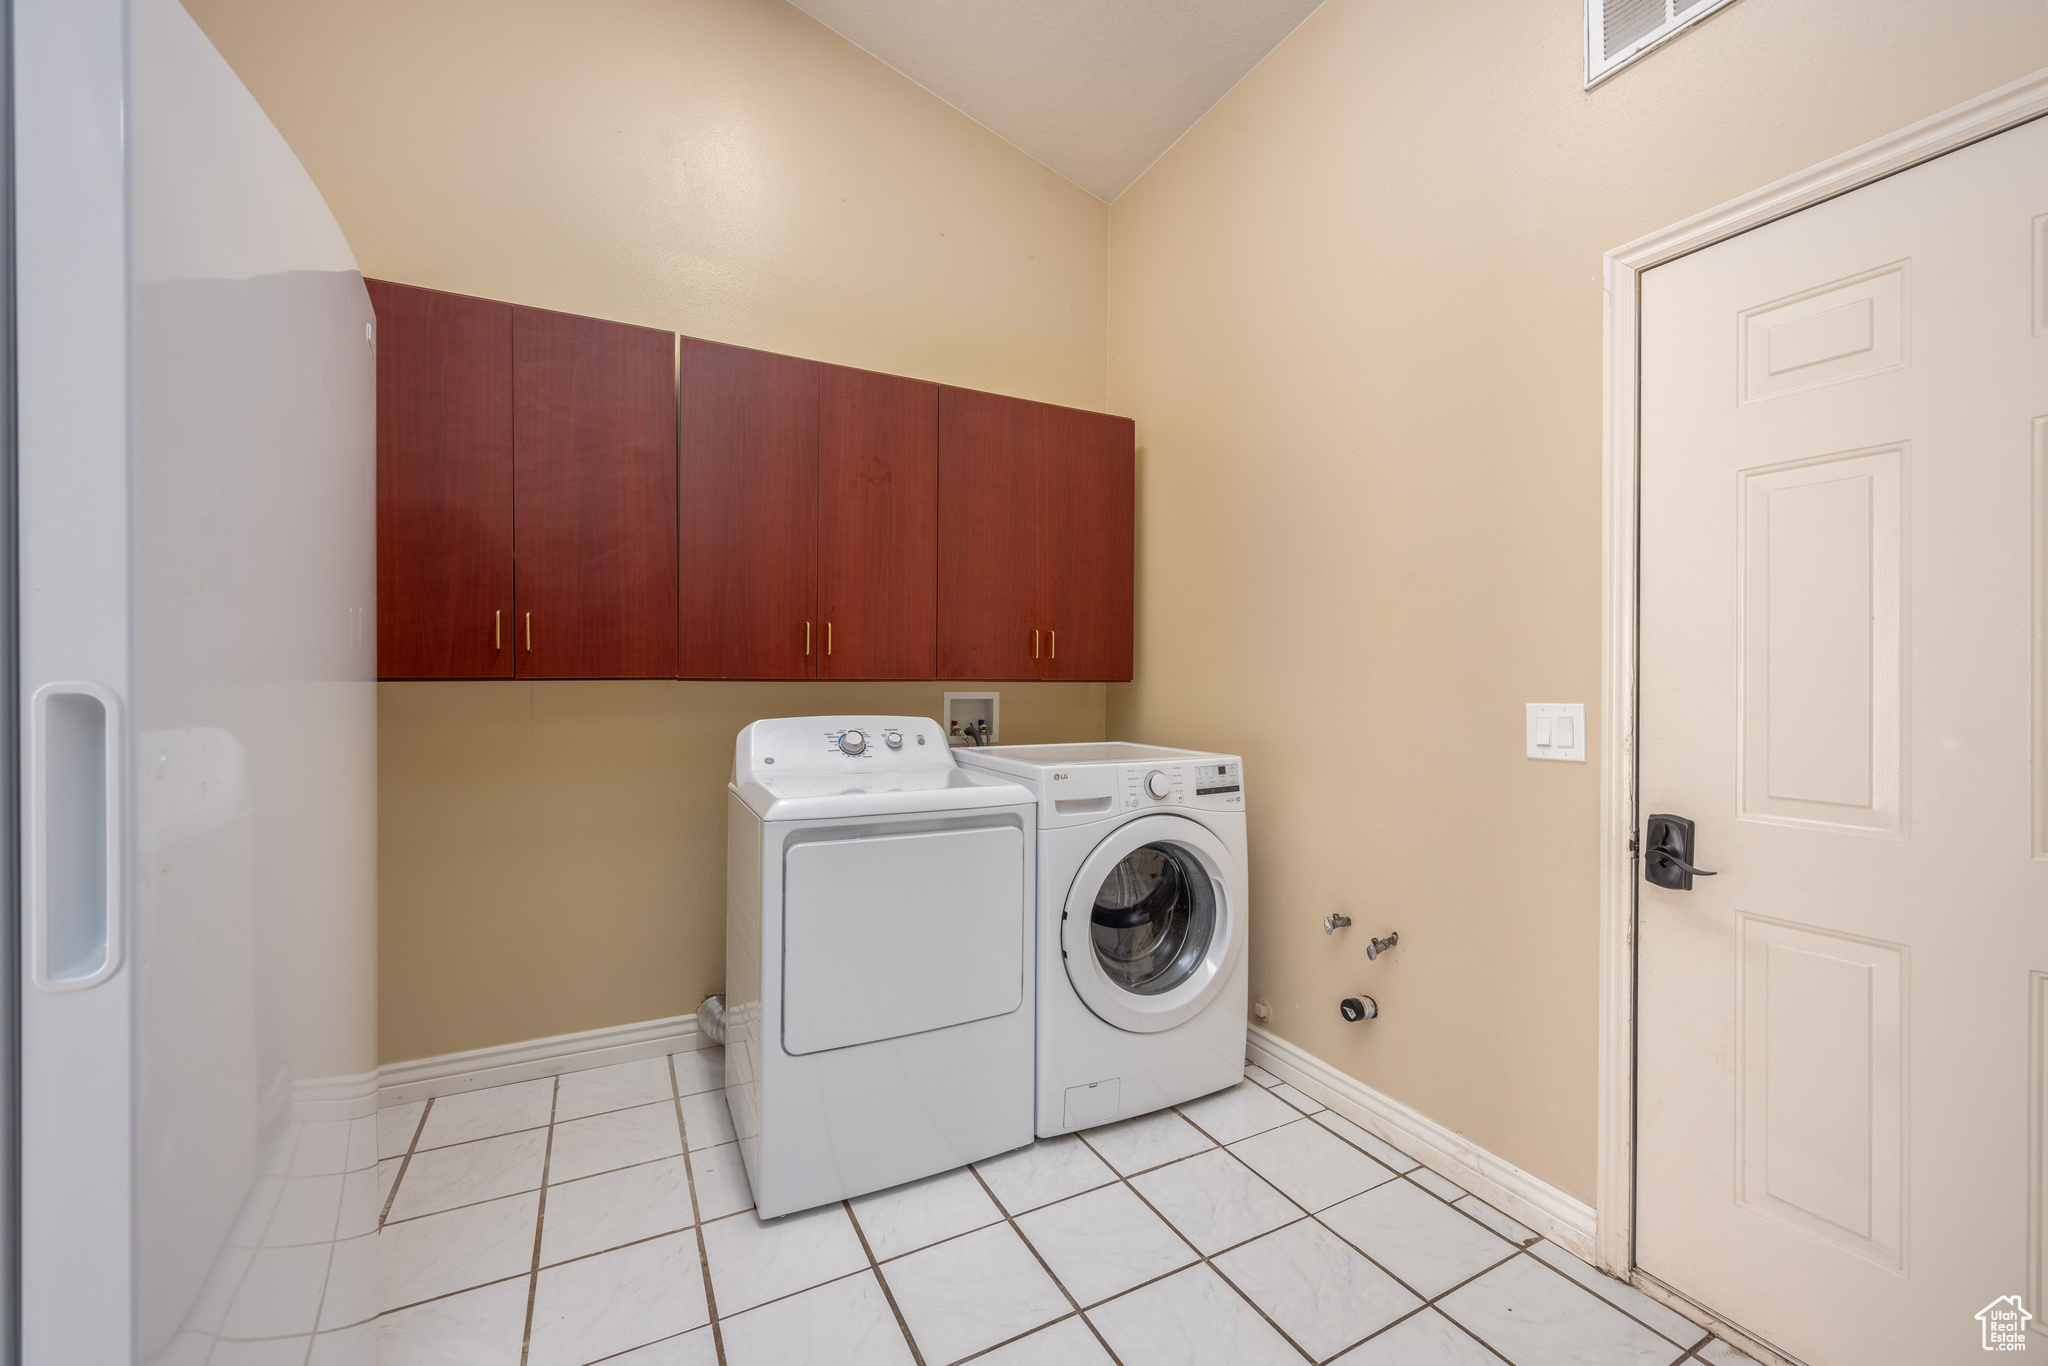 Laundry area with washer hookup, separate washer and dryer, cabinets, and light tile floors